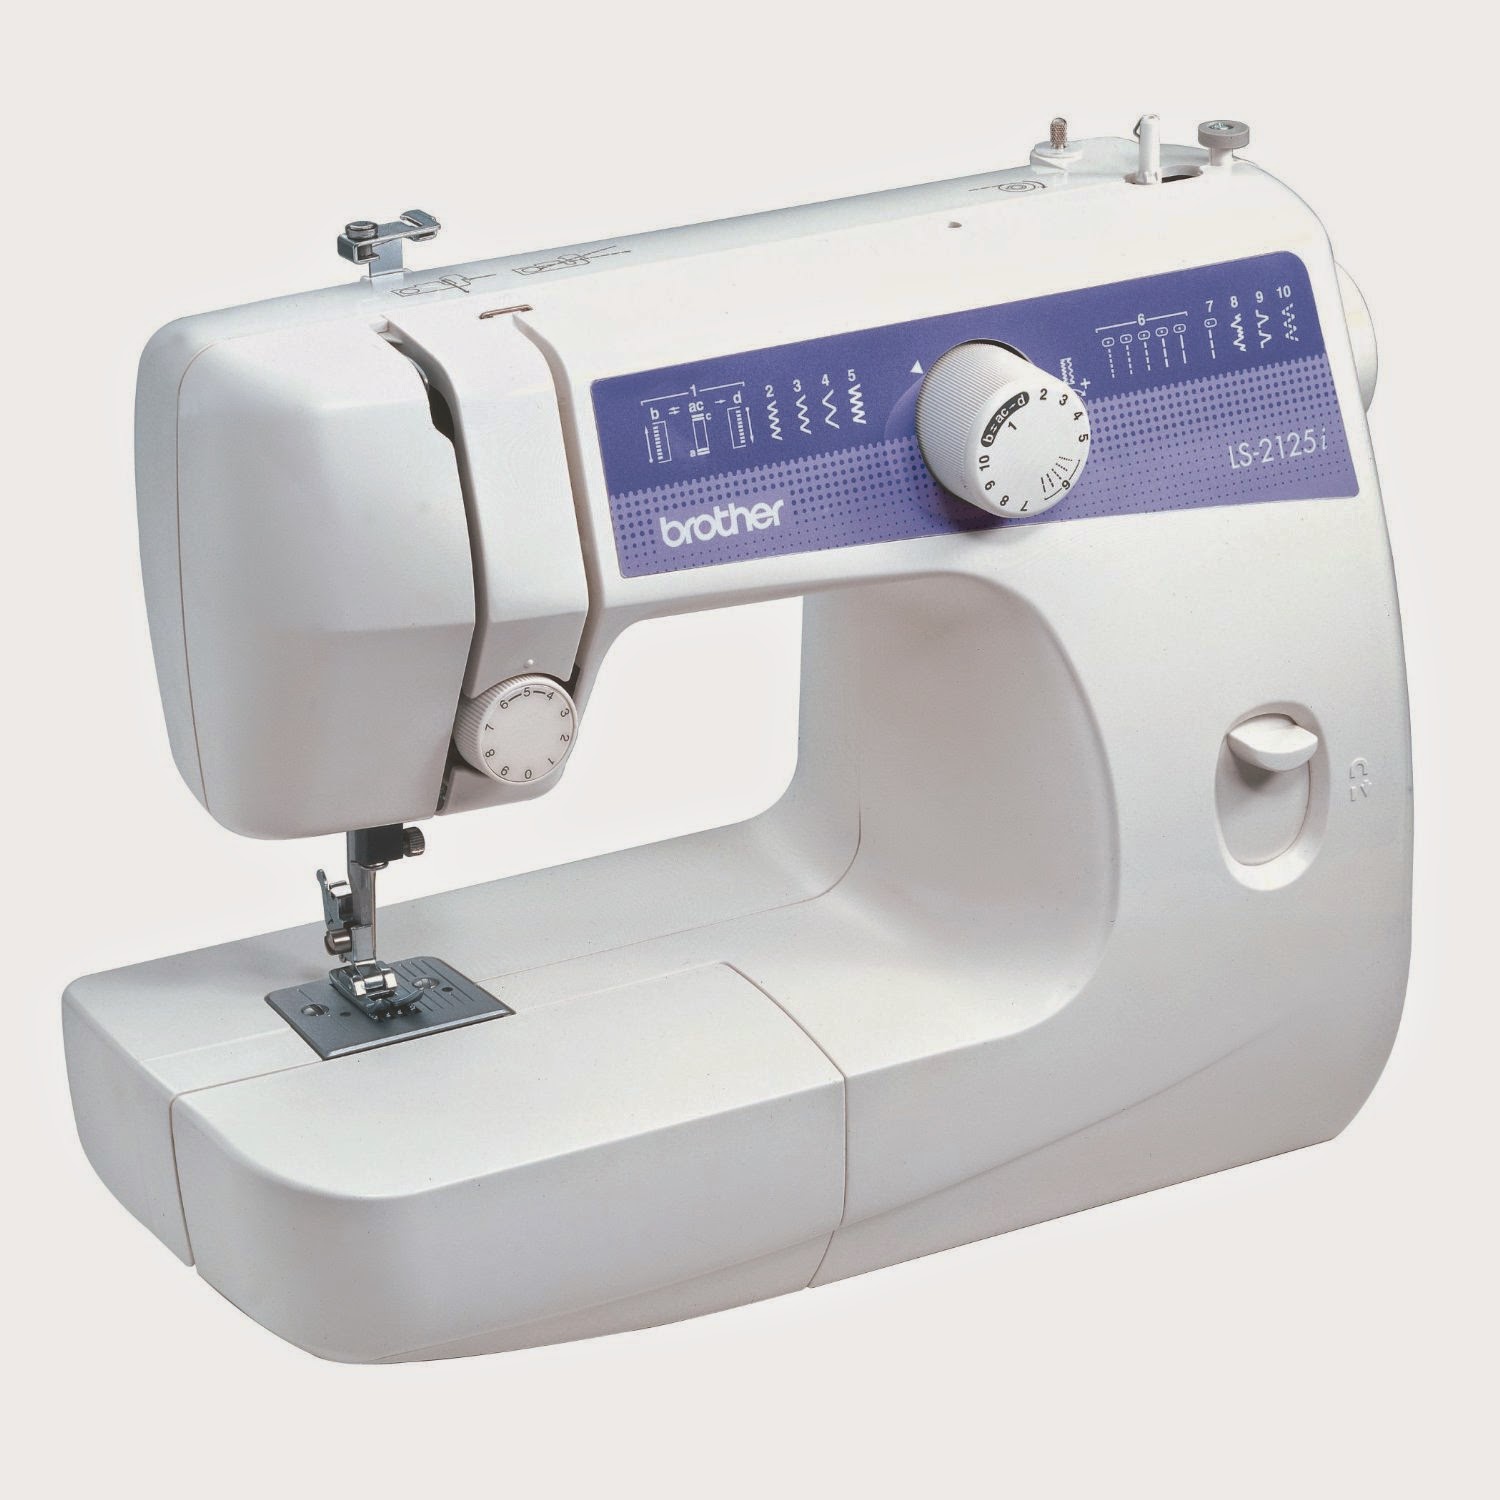 Brother LS2125i 10-Stitch Everyday Sewing Machine, review, full size sewing machine, lightweight and portable, blind hem, straight, zigzag, satin and elastic stitches, automatic 4 step buttonhole, free-arm sewing machine, basic sewing machine